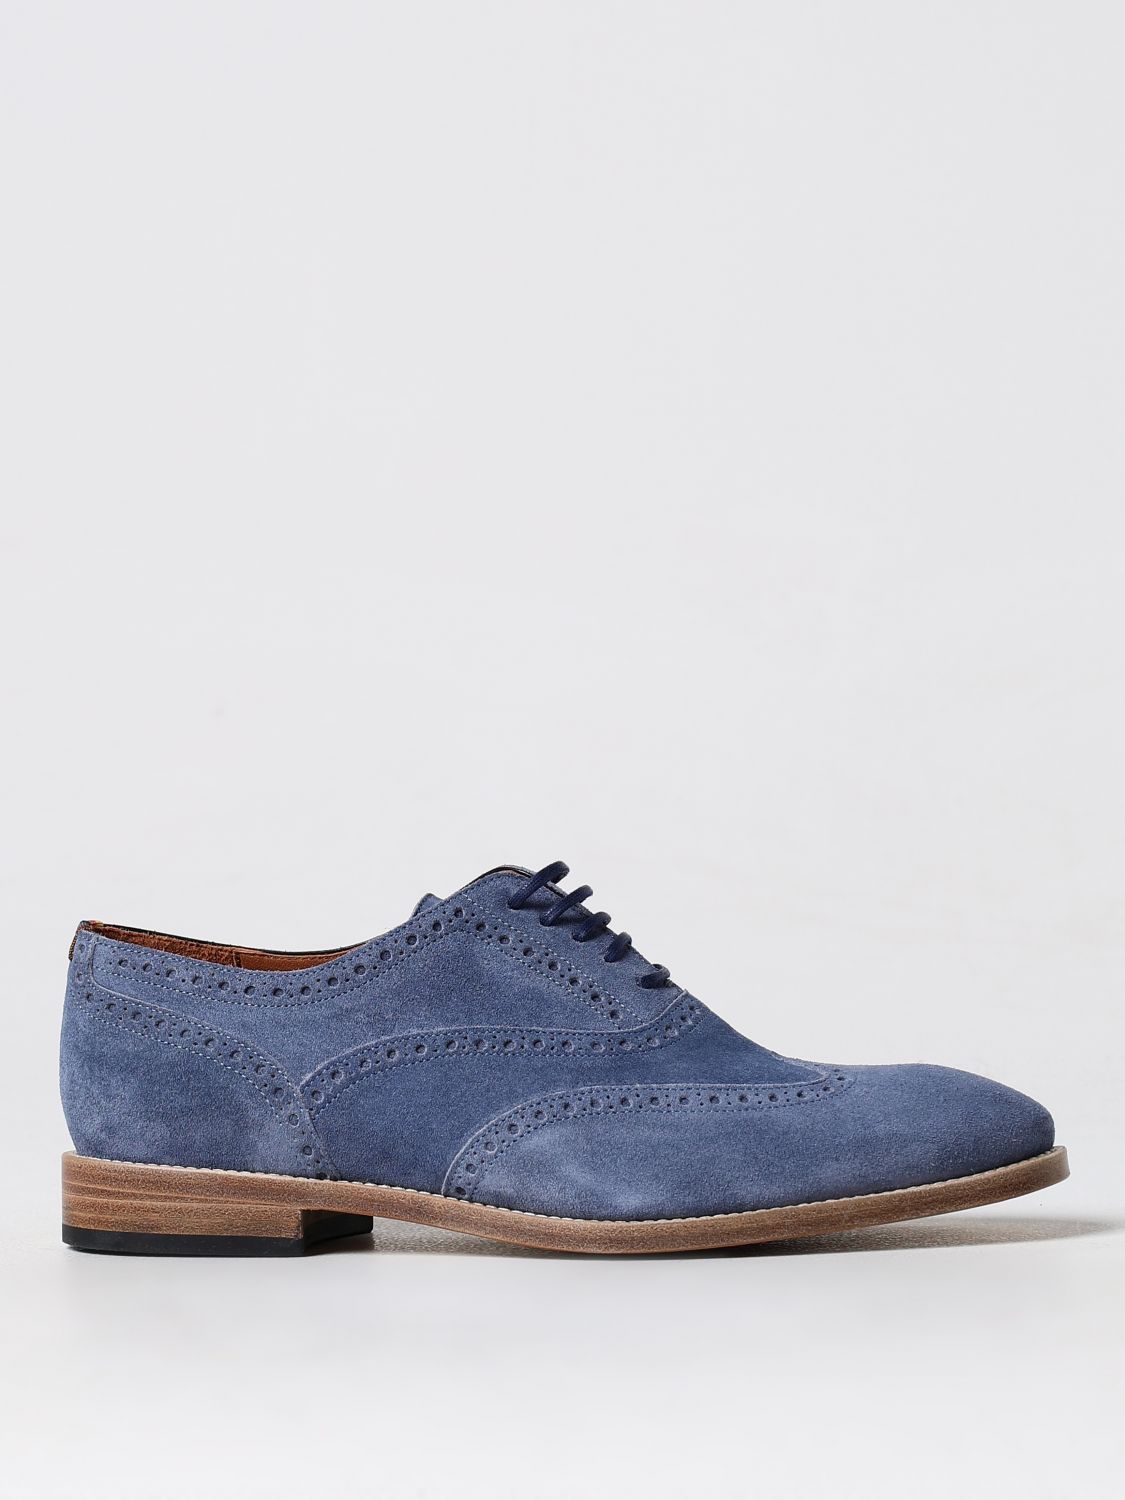 Paul Smith Brogue Shoes PAUL SMITH Men color Gnawed Blue